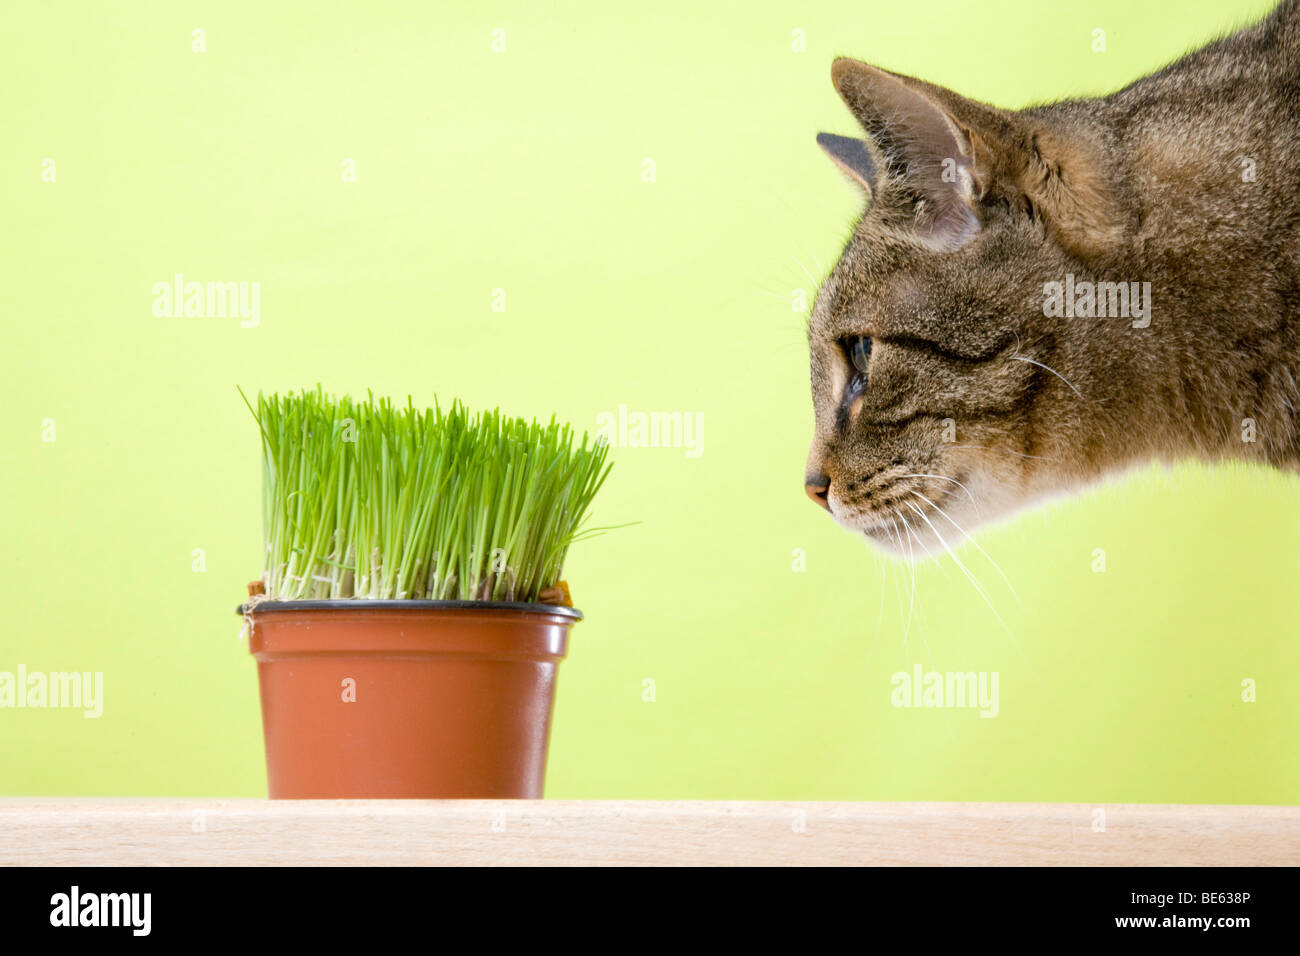 Male cat looking curiously at a pot with chives Stock Photo